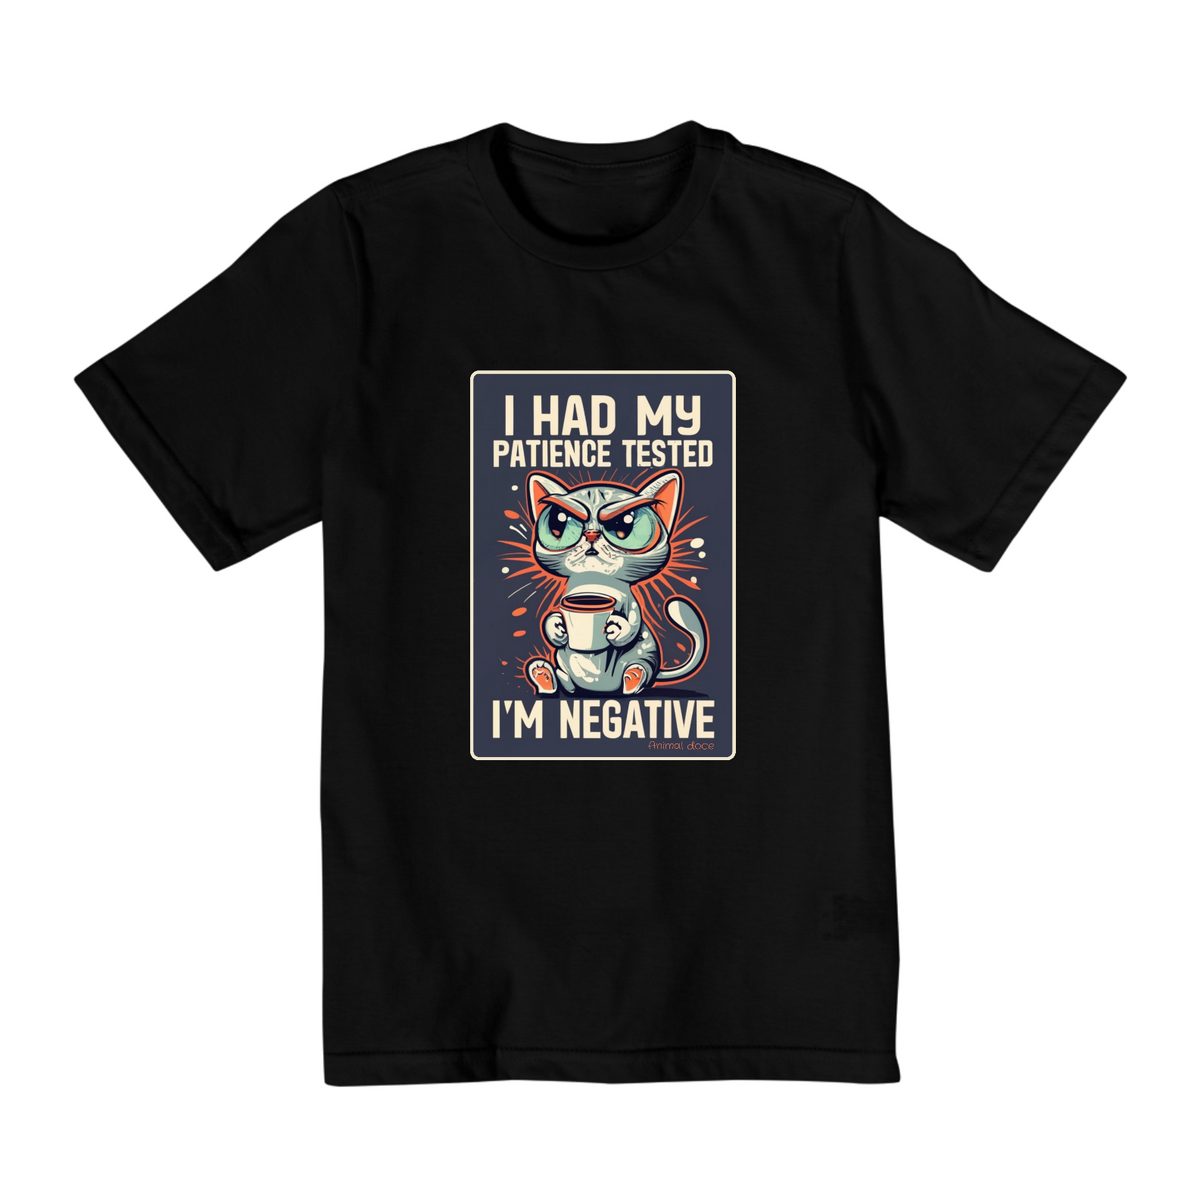 Nome do produto: CAMISETA QUALITY INFANTIL CAT, I HAD MY PATIENCE TESTED-2 A 8 ANOS